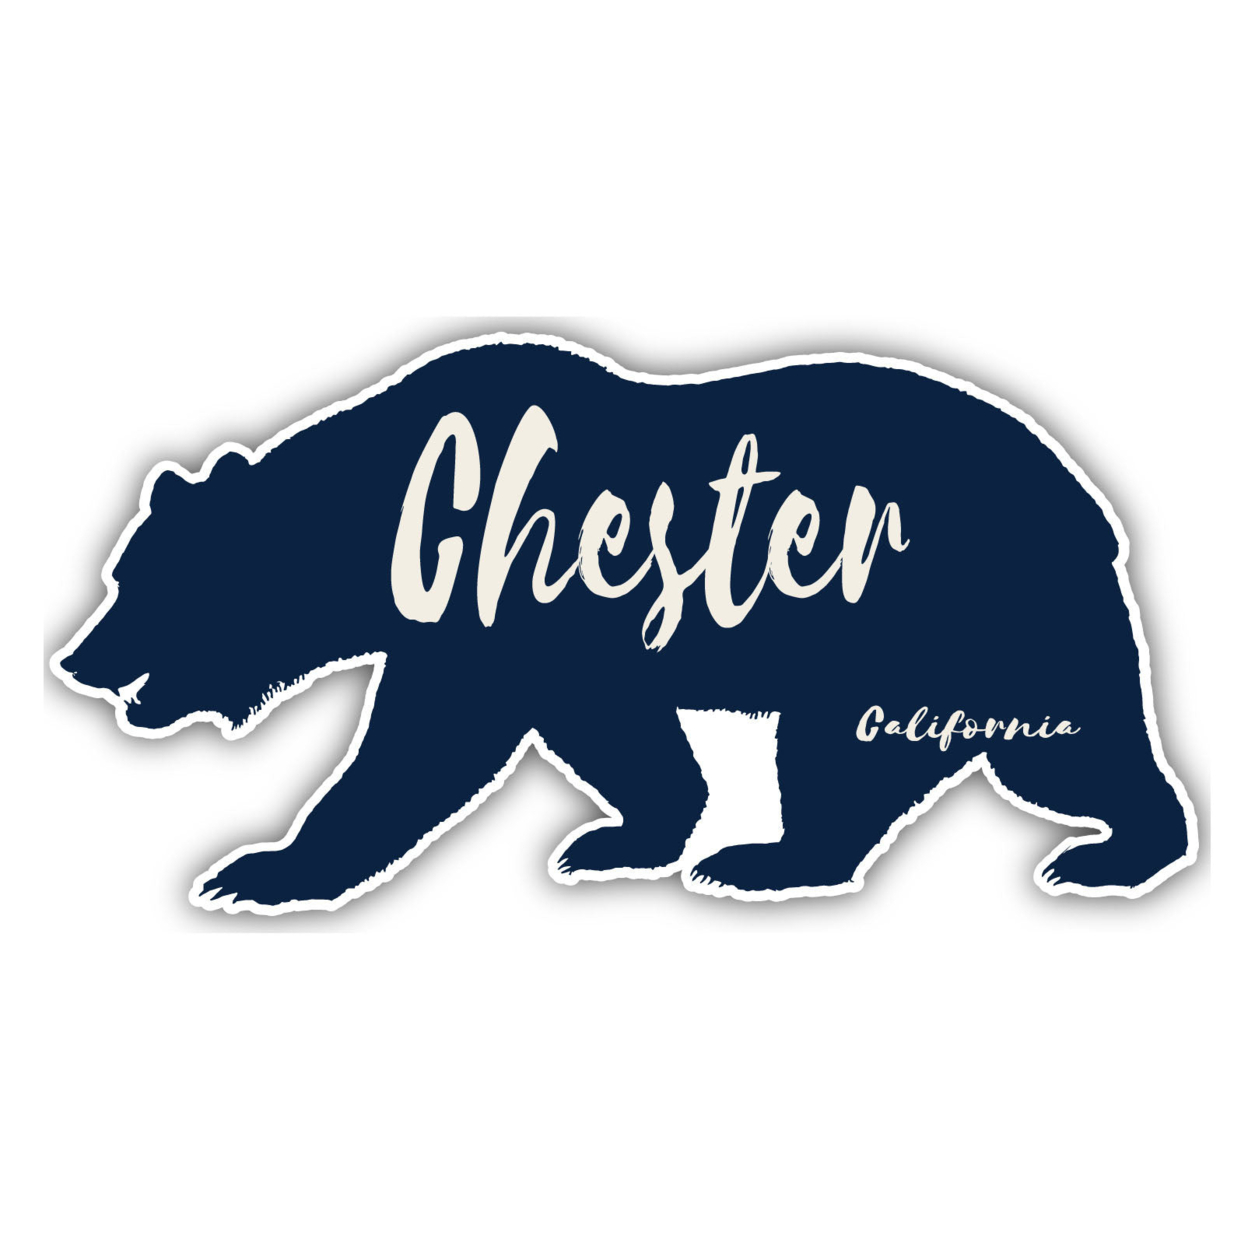 Chester California Souvenir Decorative Stickers (Choose Theme And Size) - 4-Pack, 8-Inch, Bear